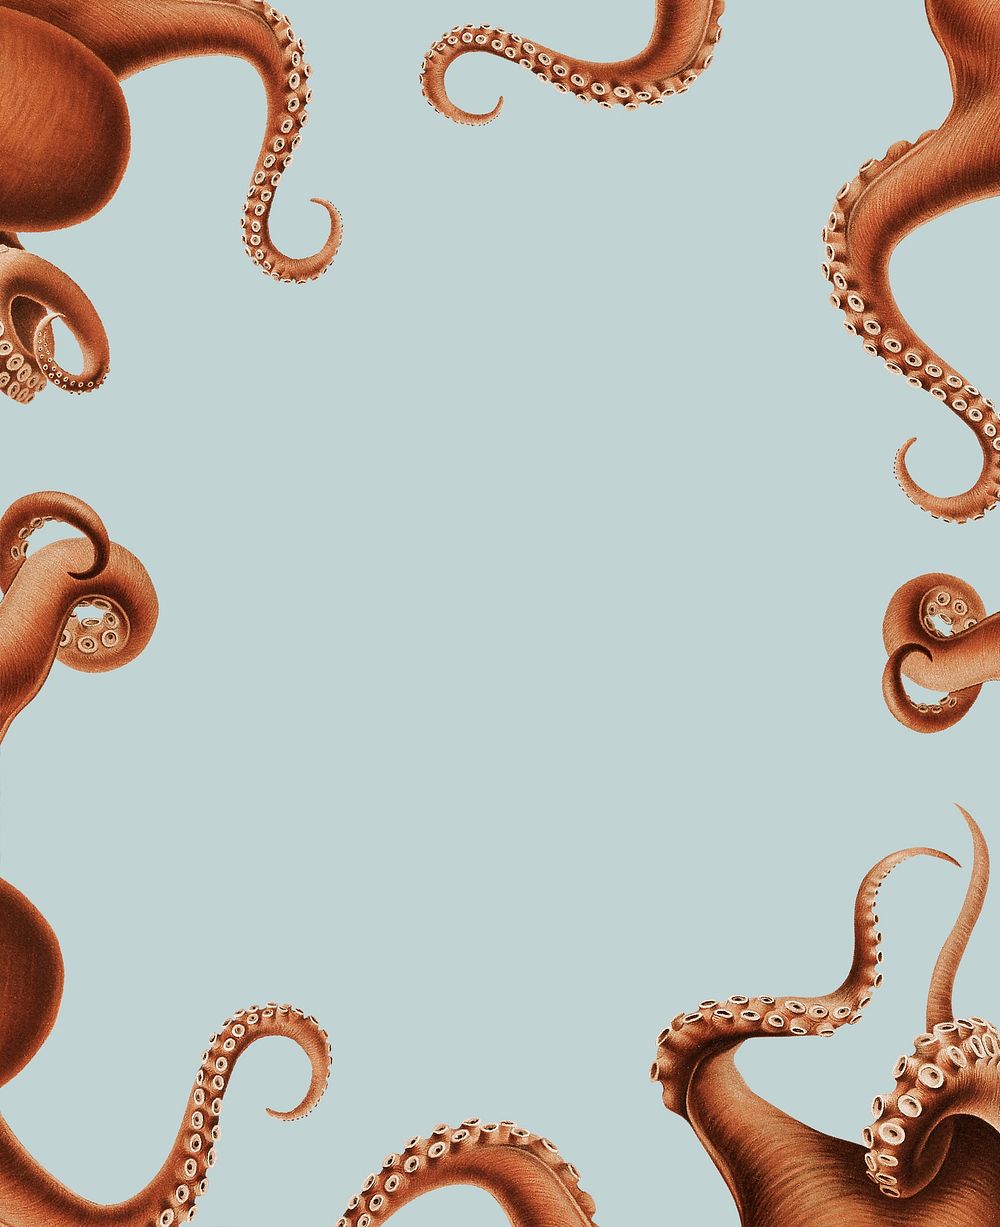 Octopus tentacles frame design with a copy space